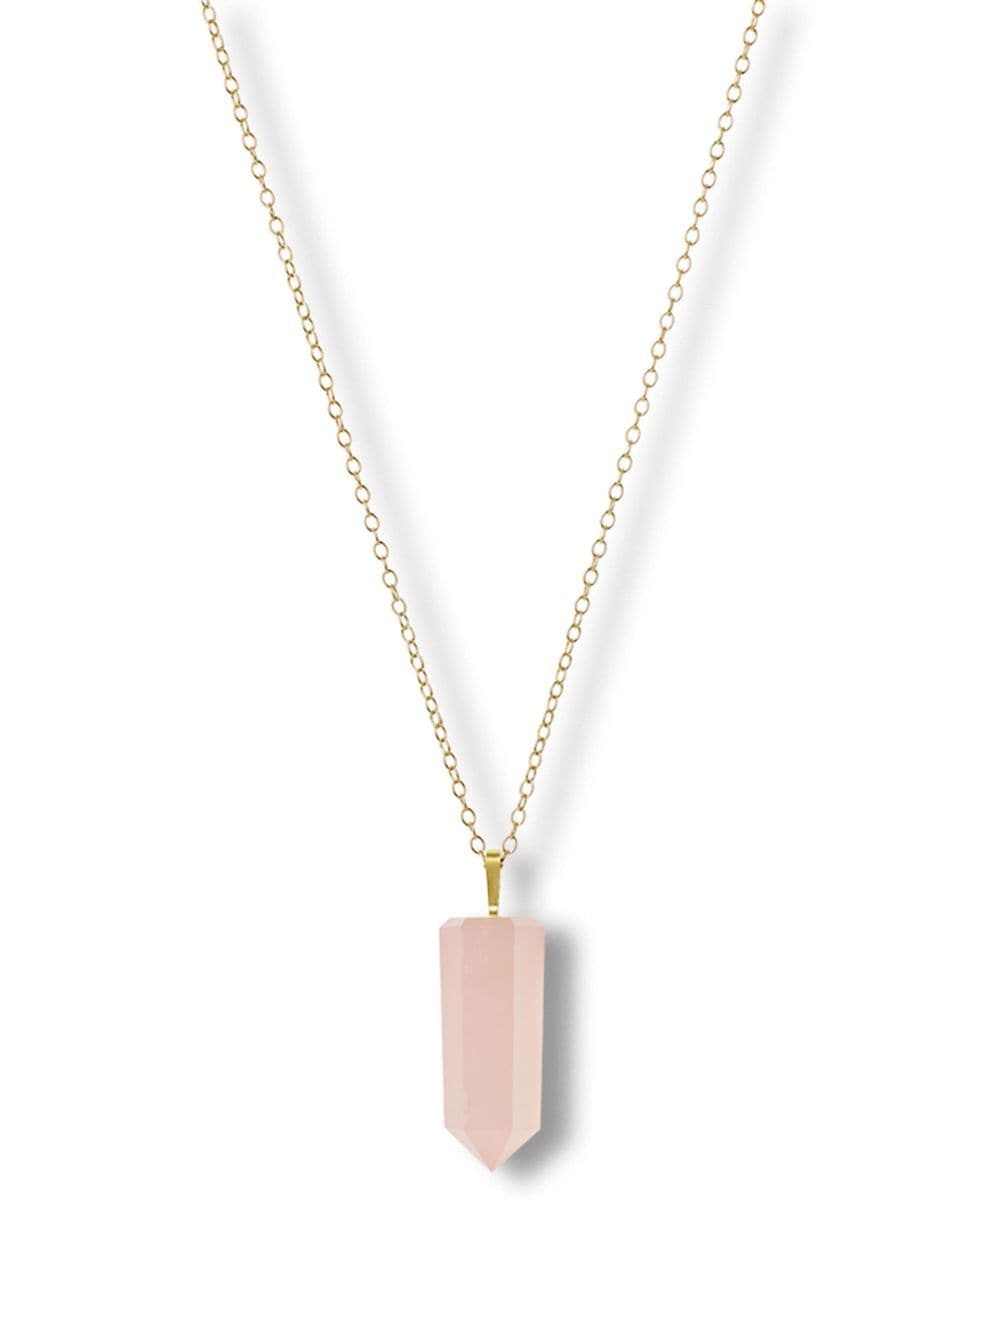 The Alkemistry 18kt Yellow Gold Iqra Rose Quartz Crystal Necklace